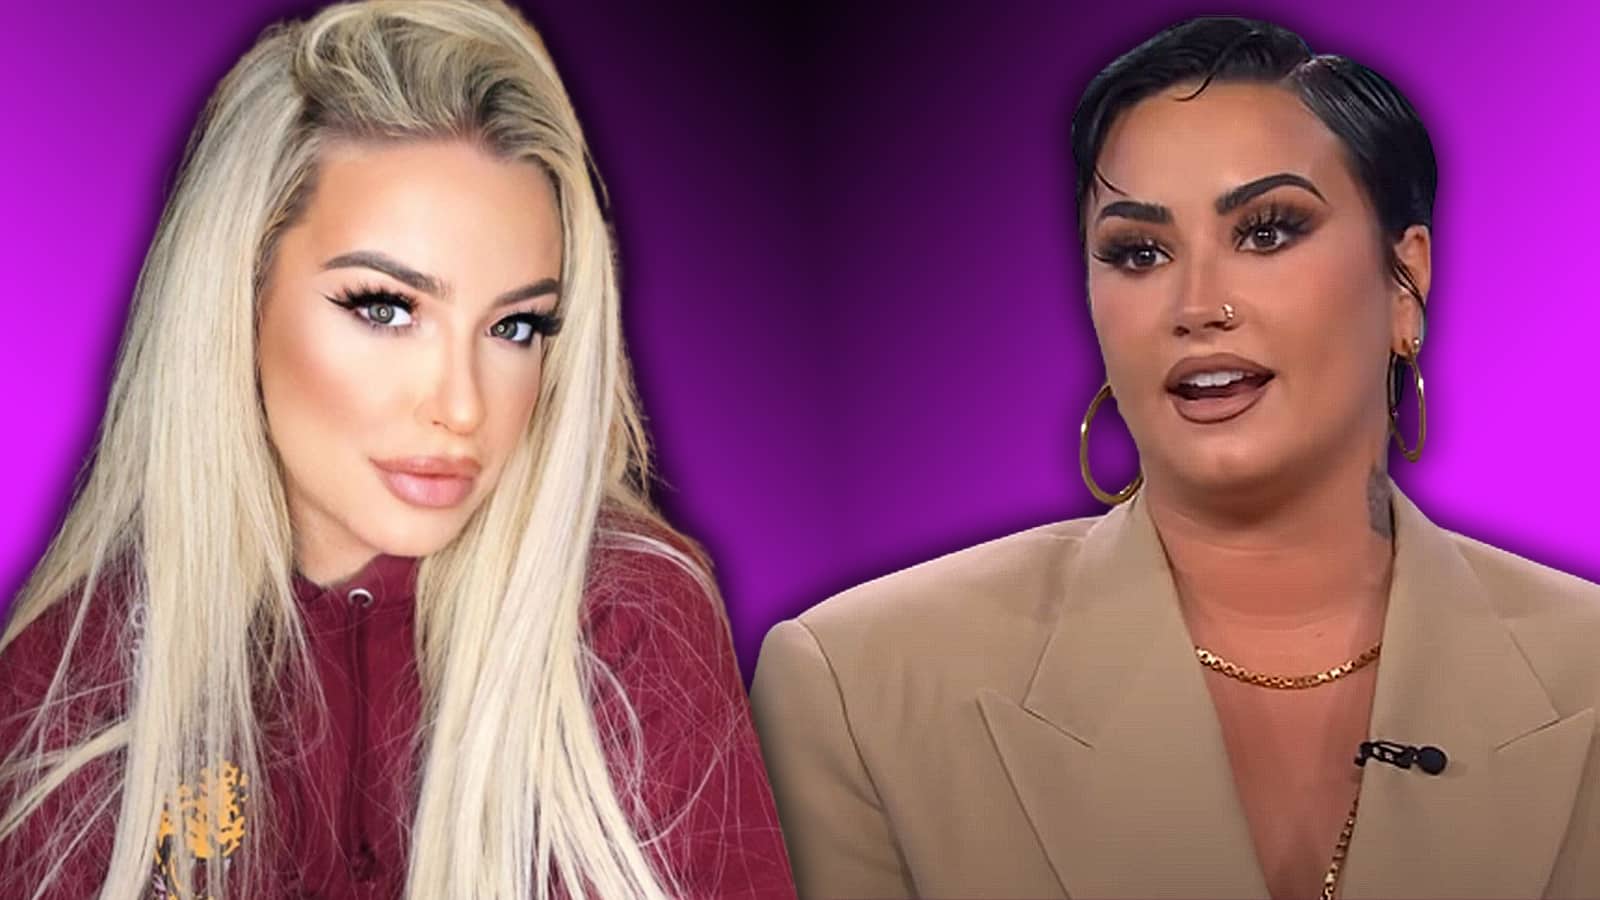 Tana Mongeau seen leaving party with Demi Lovato